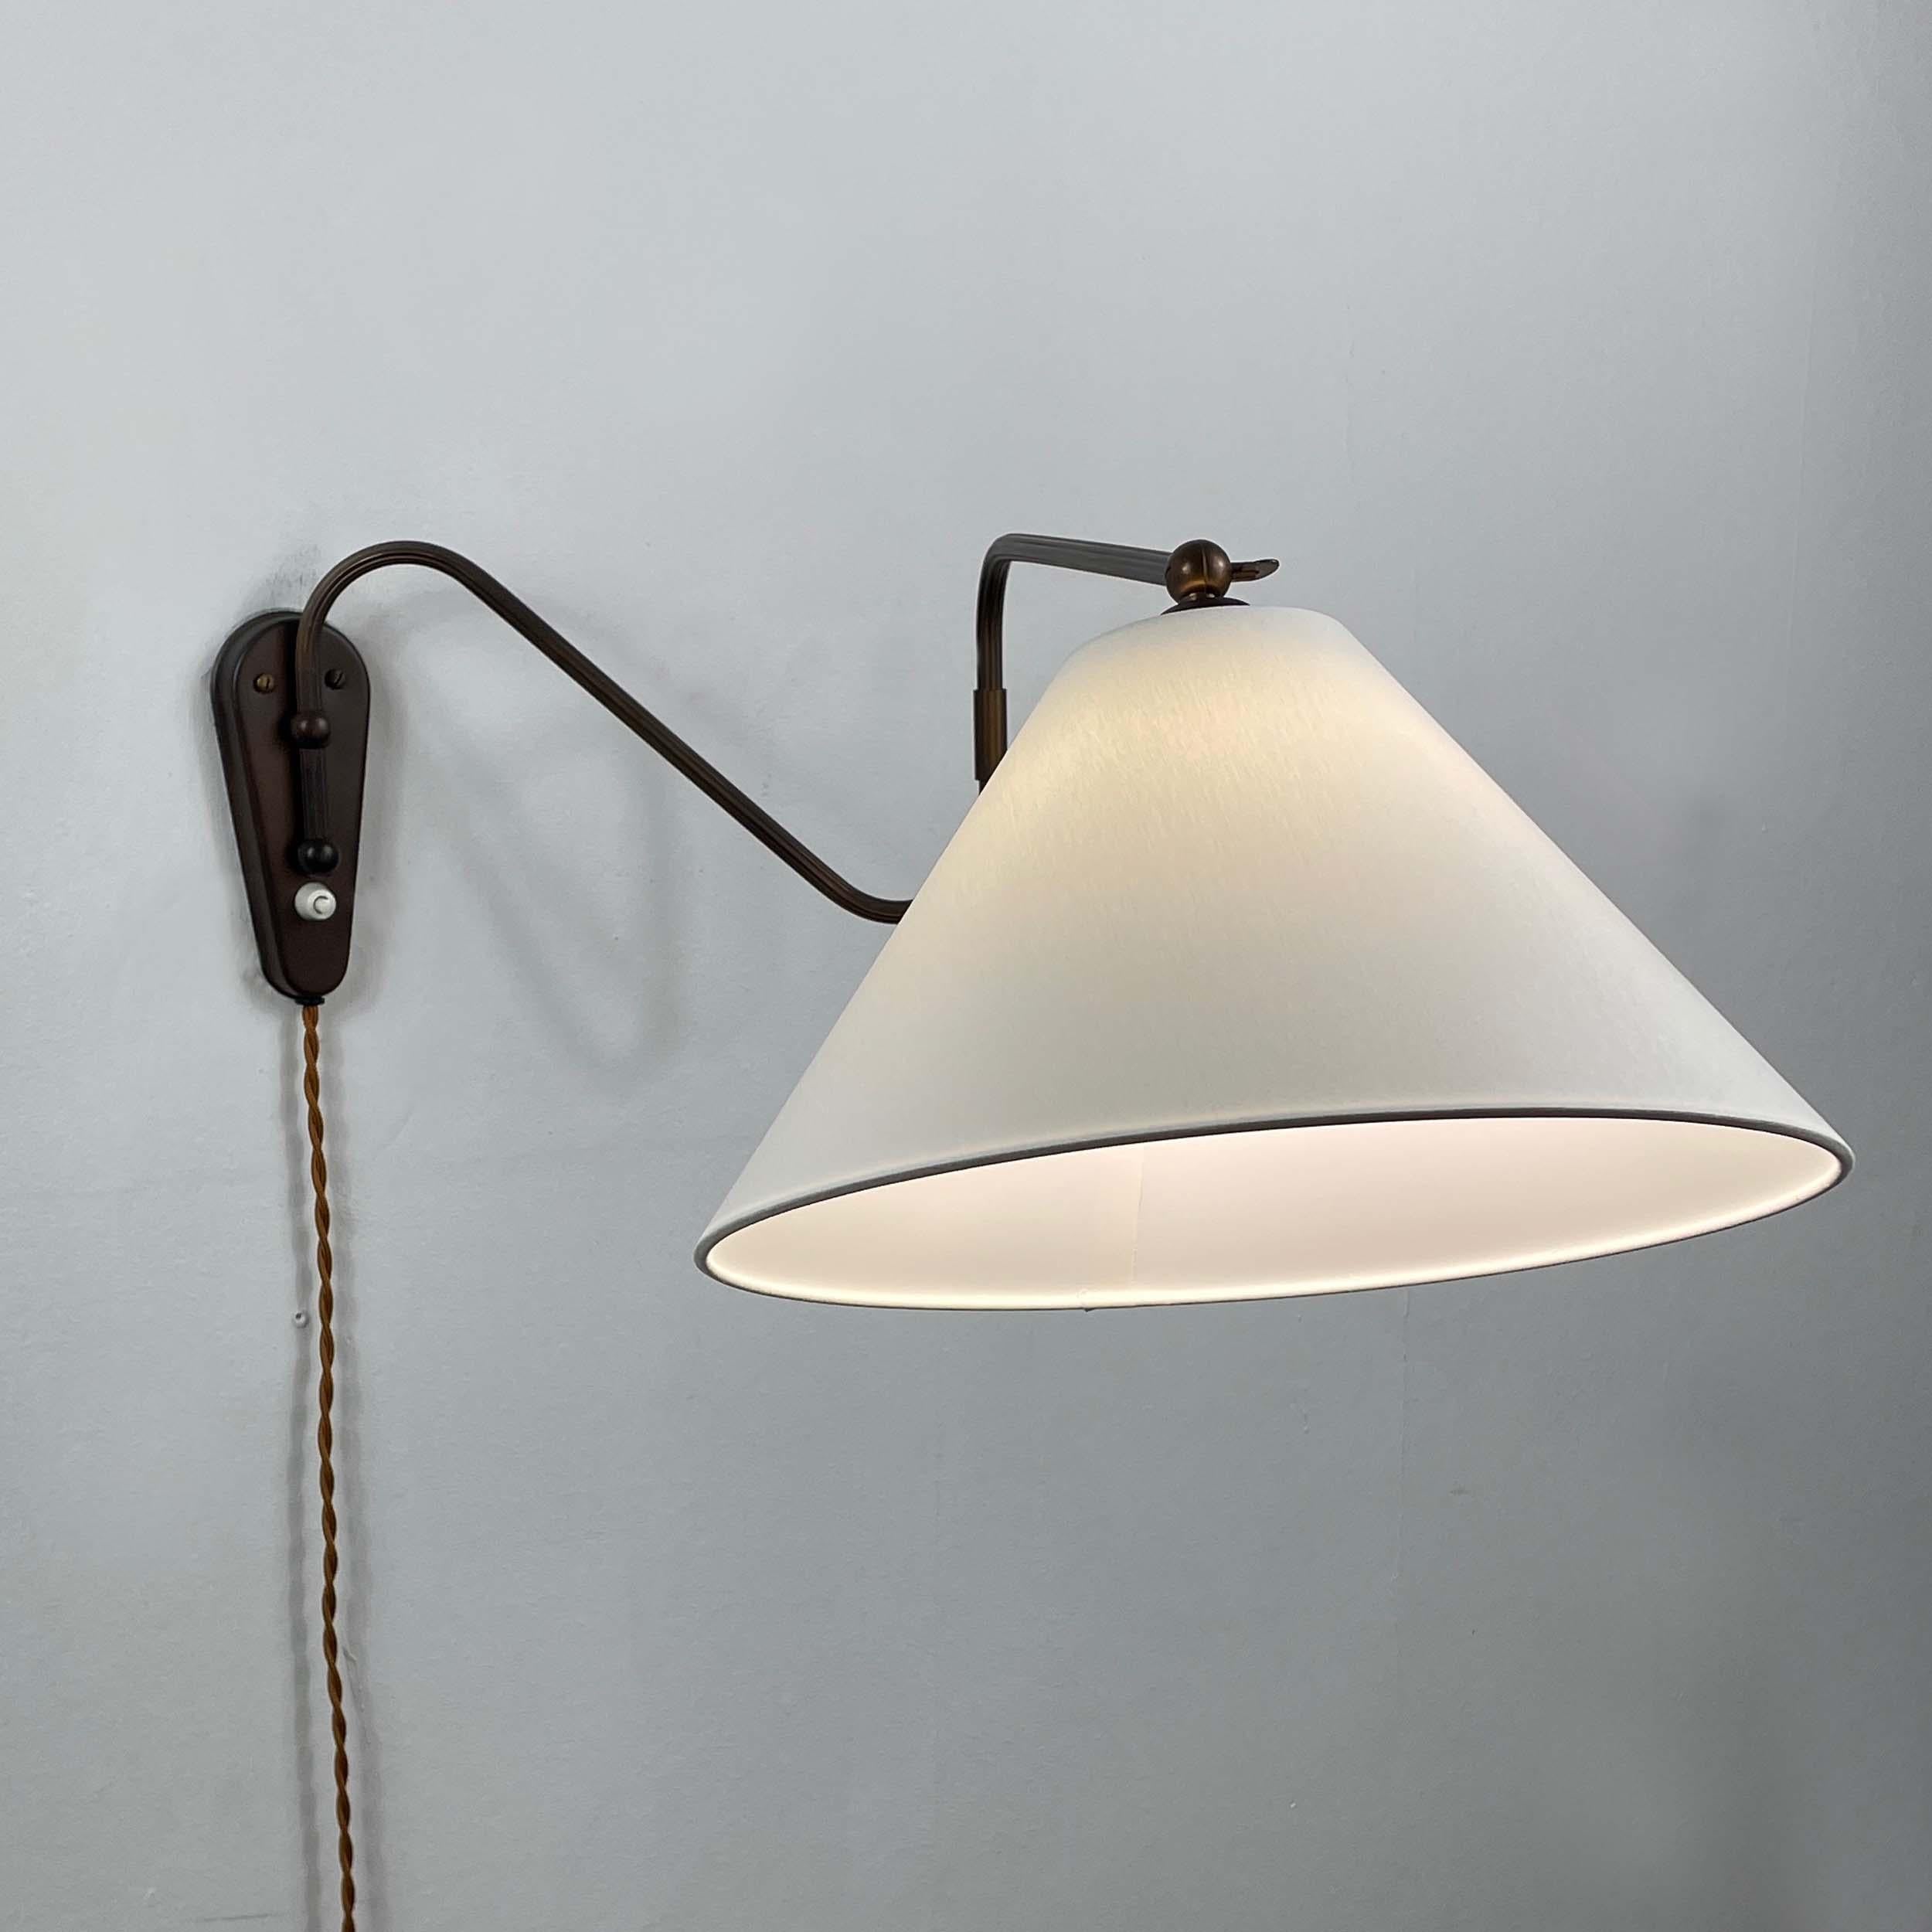 Bronzed Brass Articulating and Extendable Wall Light, Sweden 1950s For Sale 7